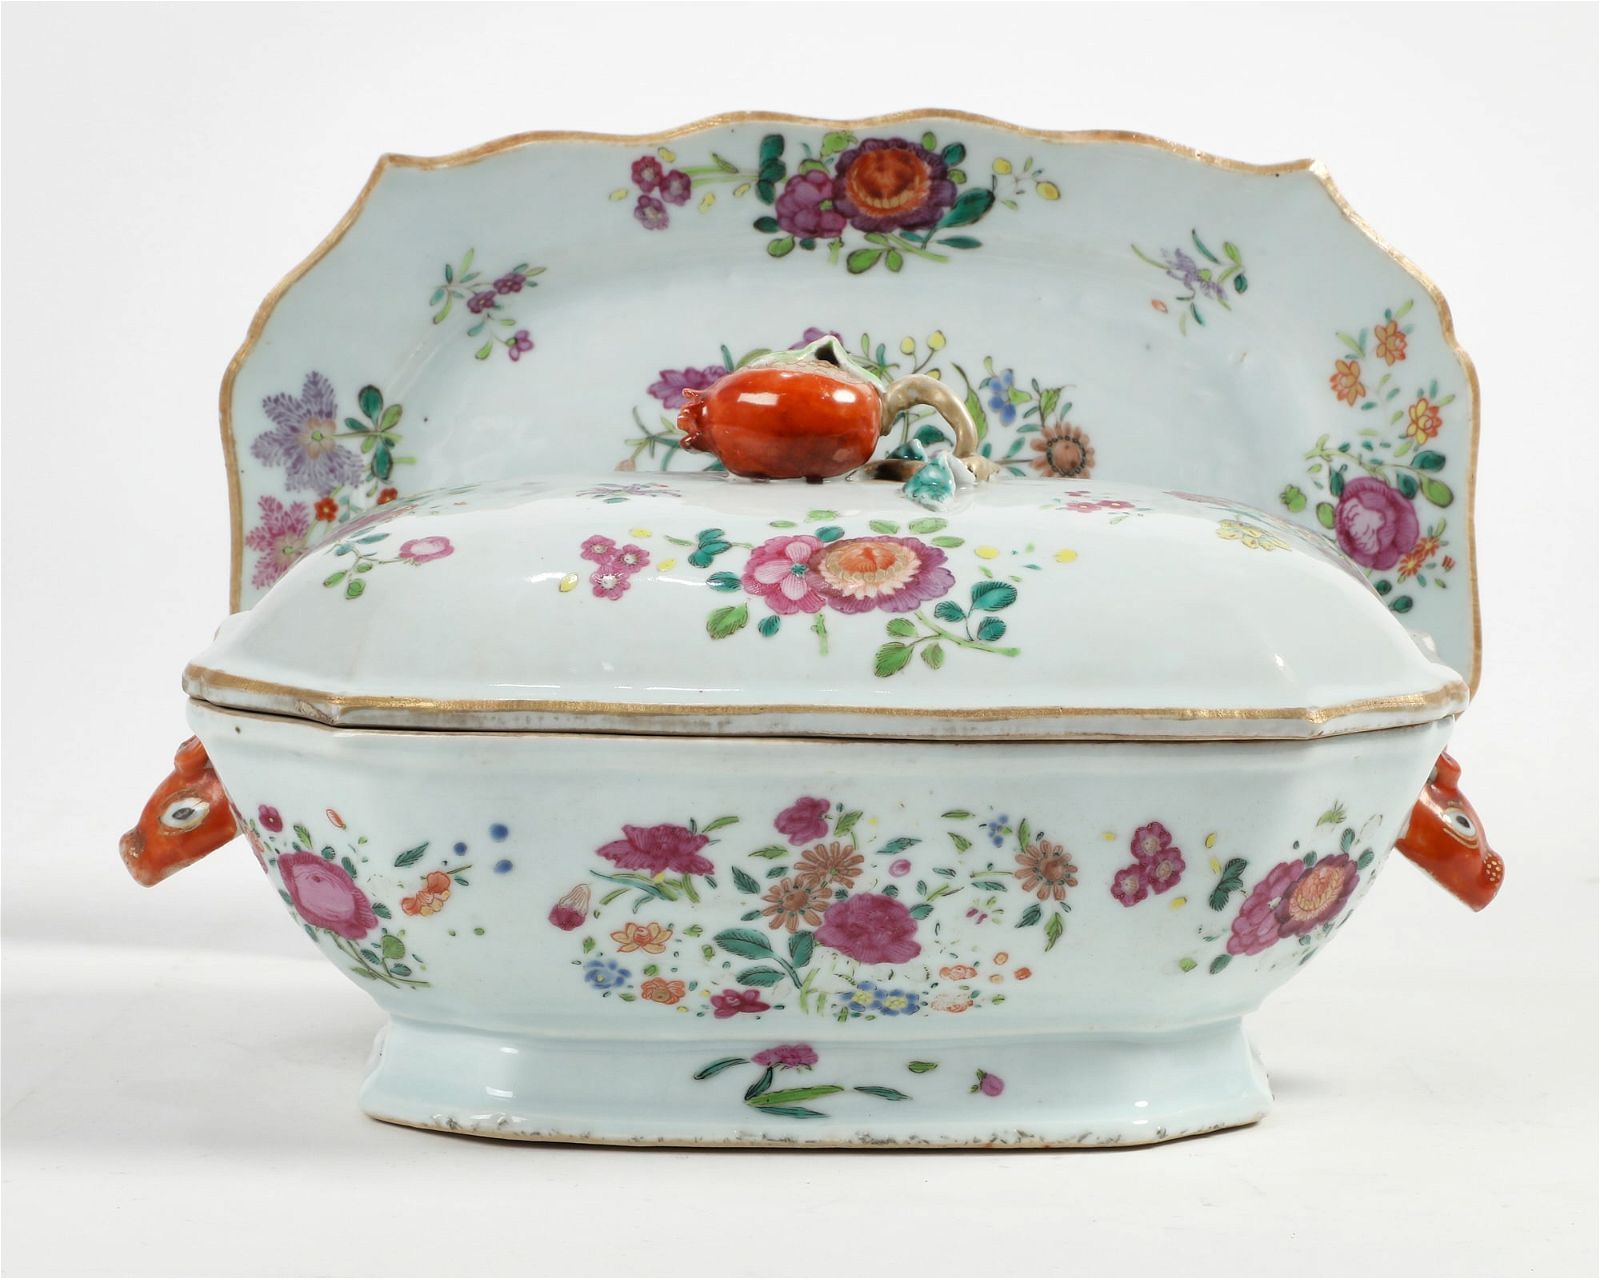 A CHINESE EXPORT FAMILLE ROSE PORCELAIN